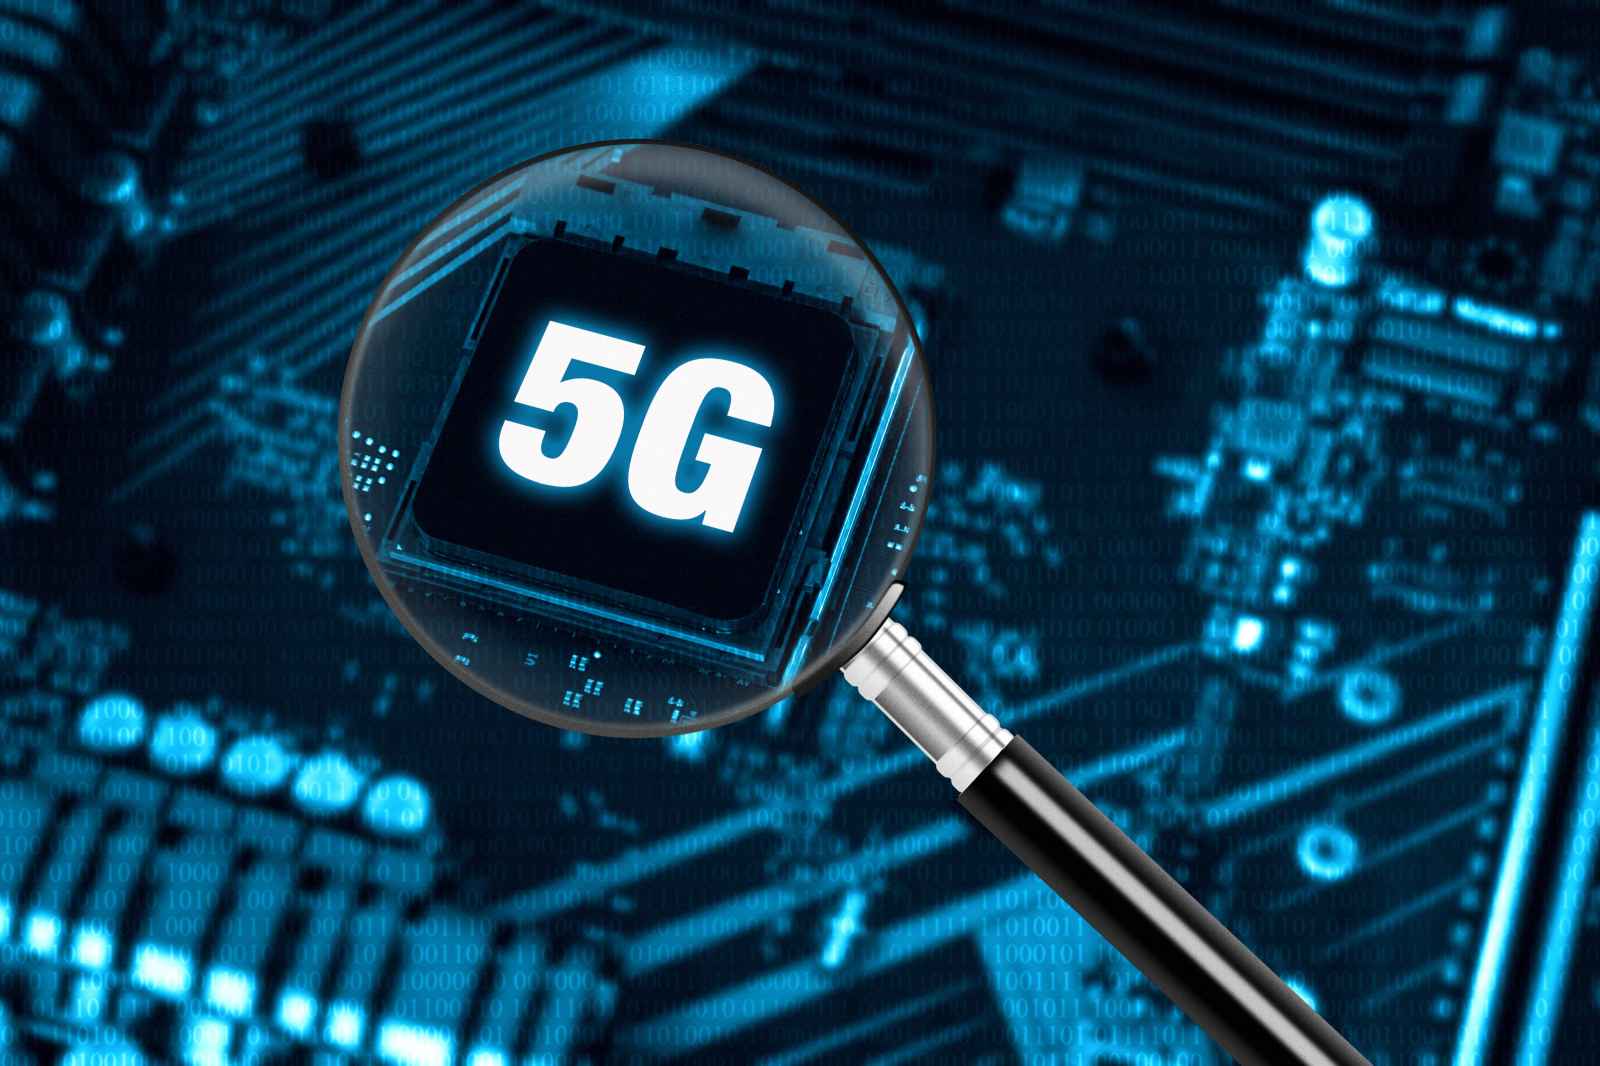  IoT with 5G - Faster and Smoother